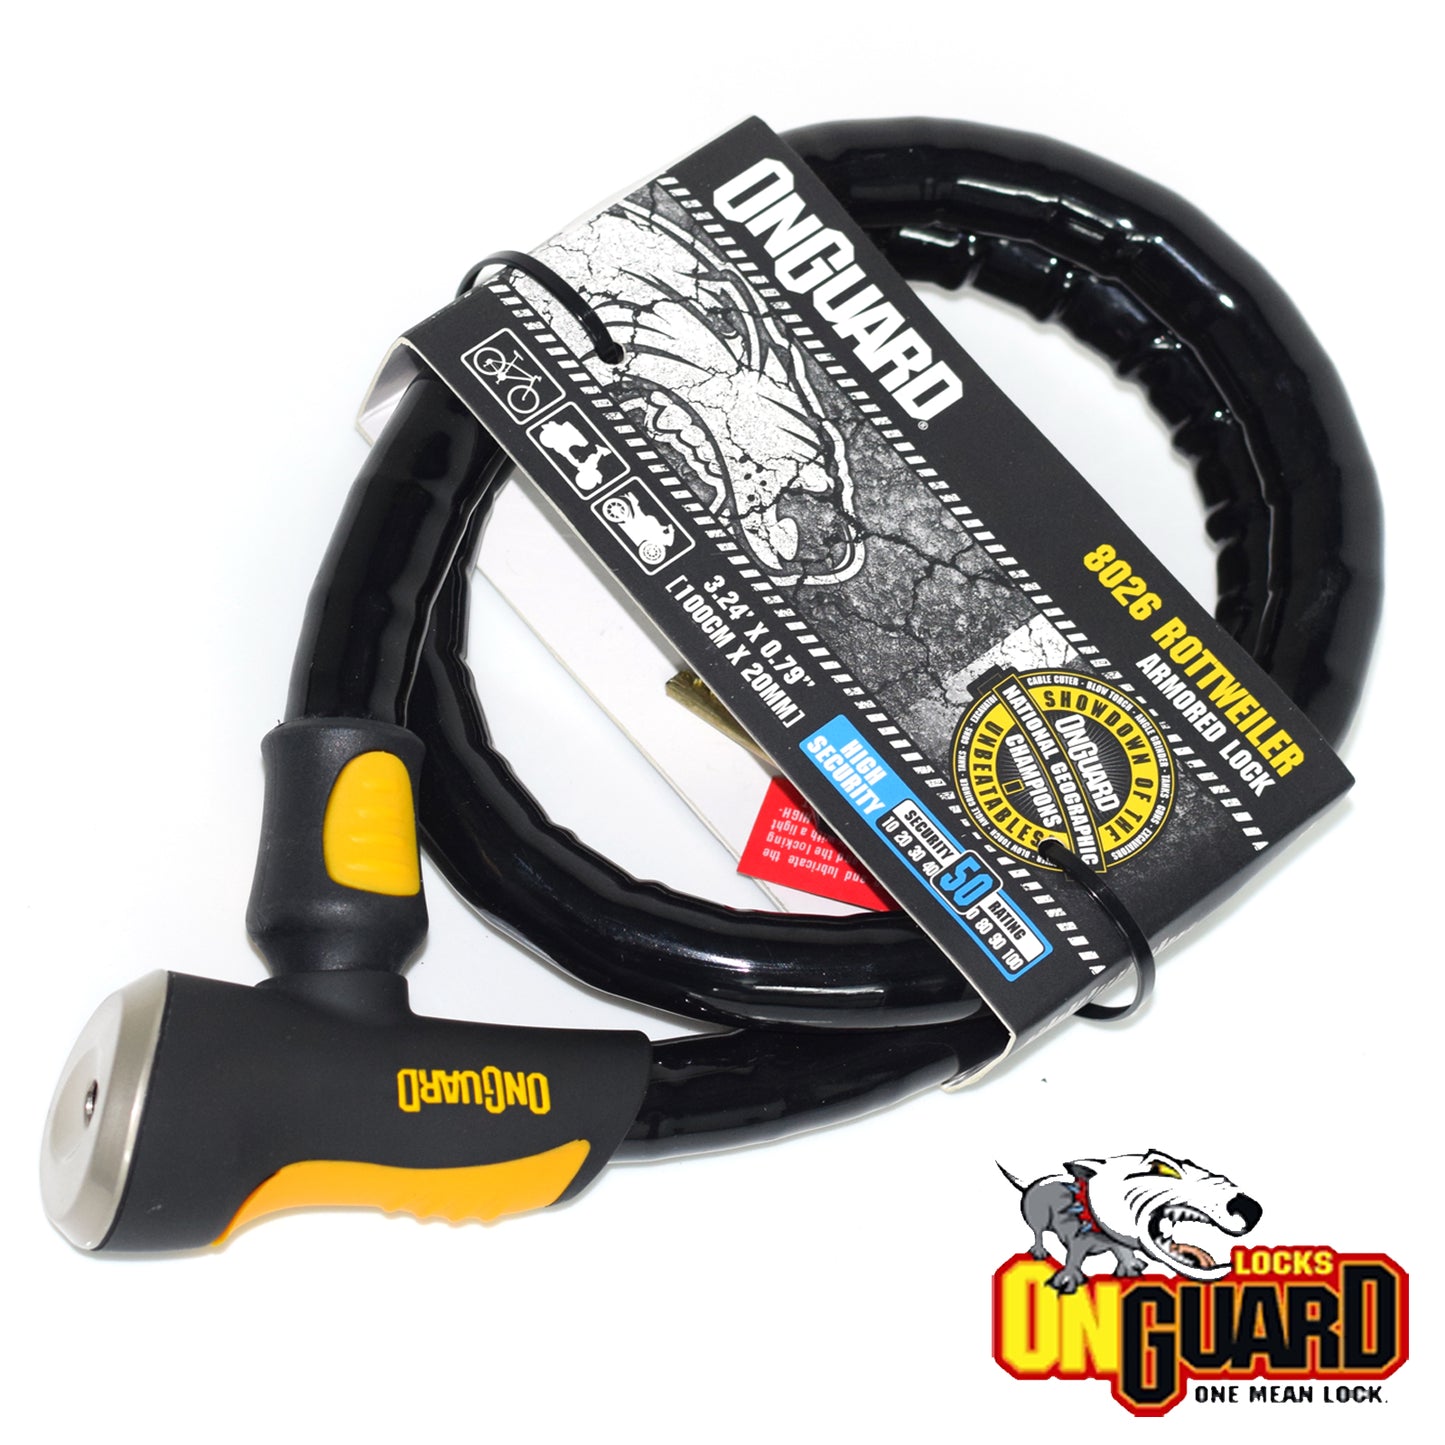 Onguard Rottweiller 8026 Armoured Bike Cable Lock